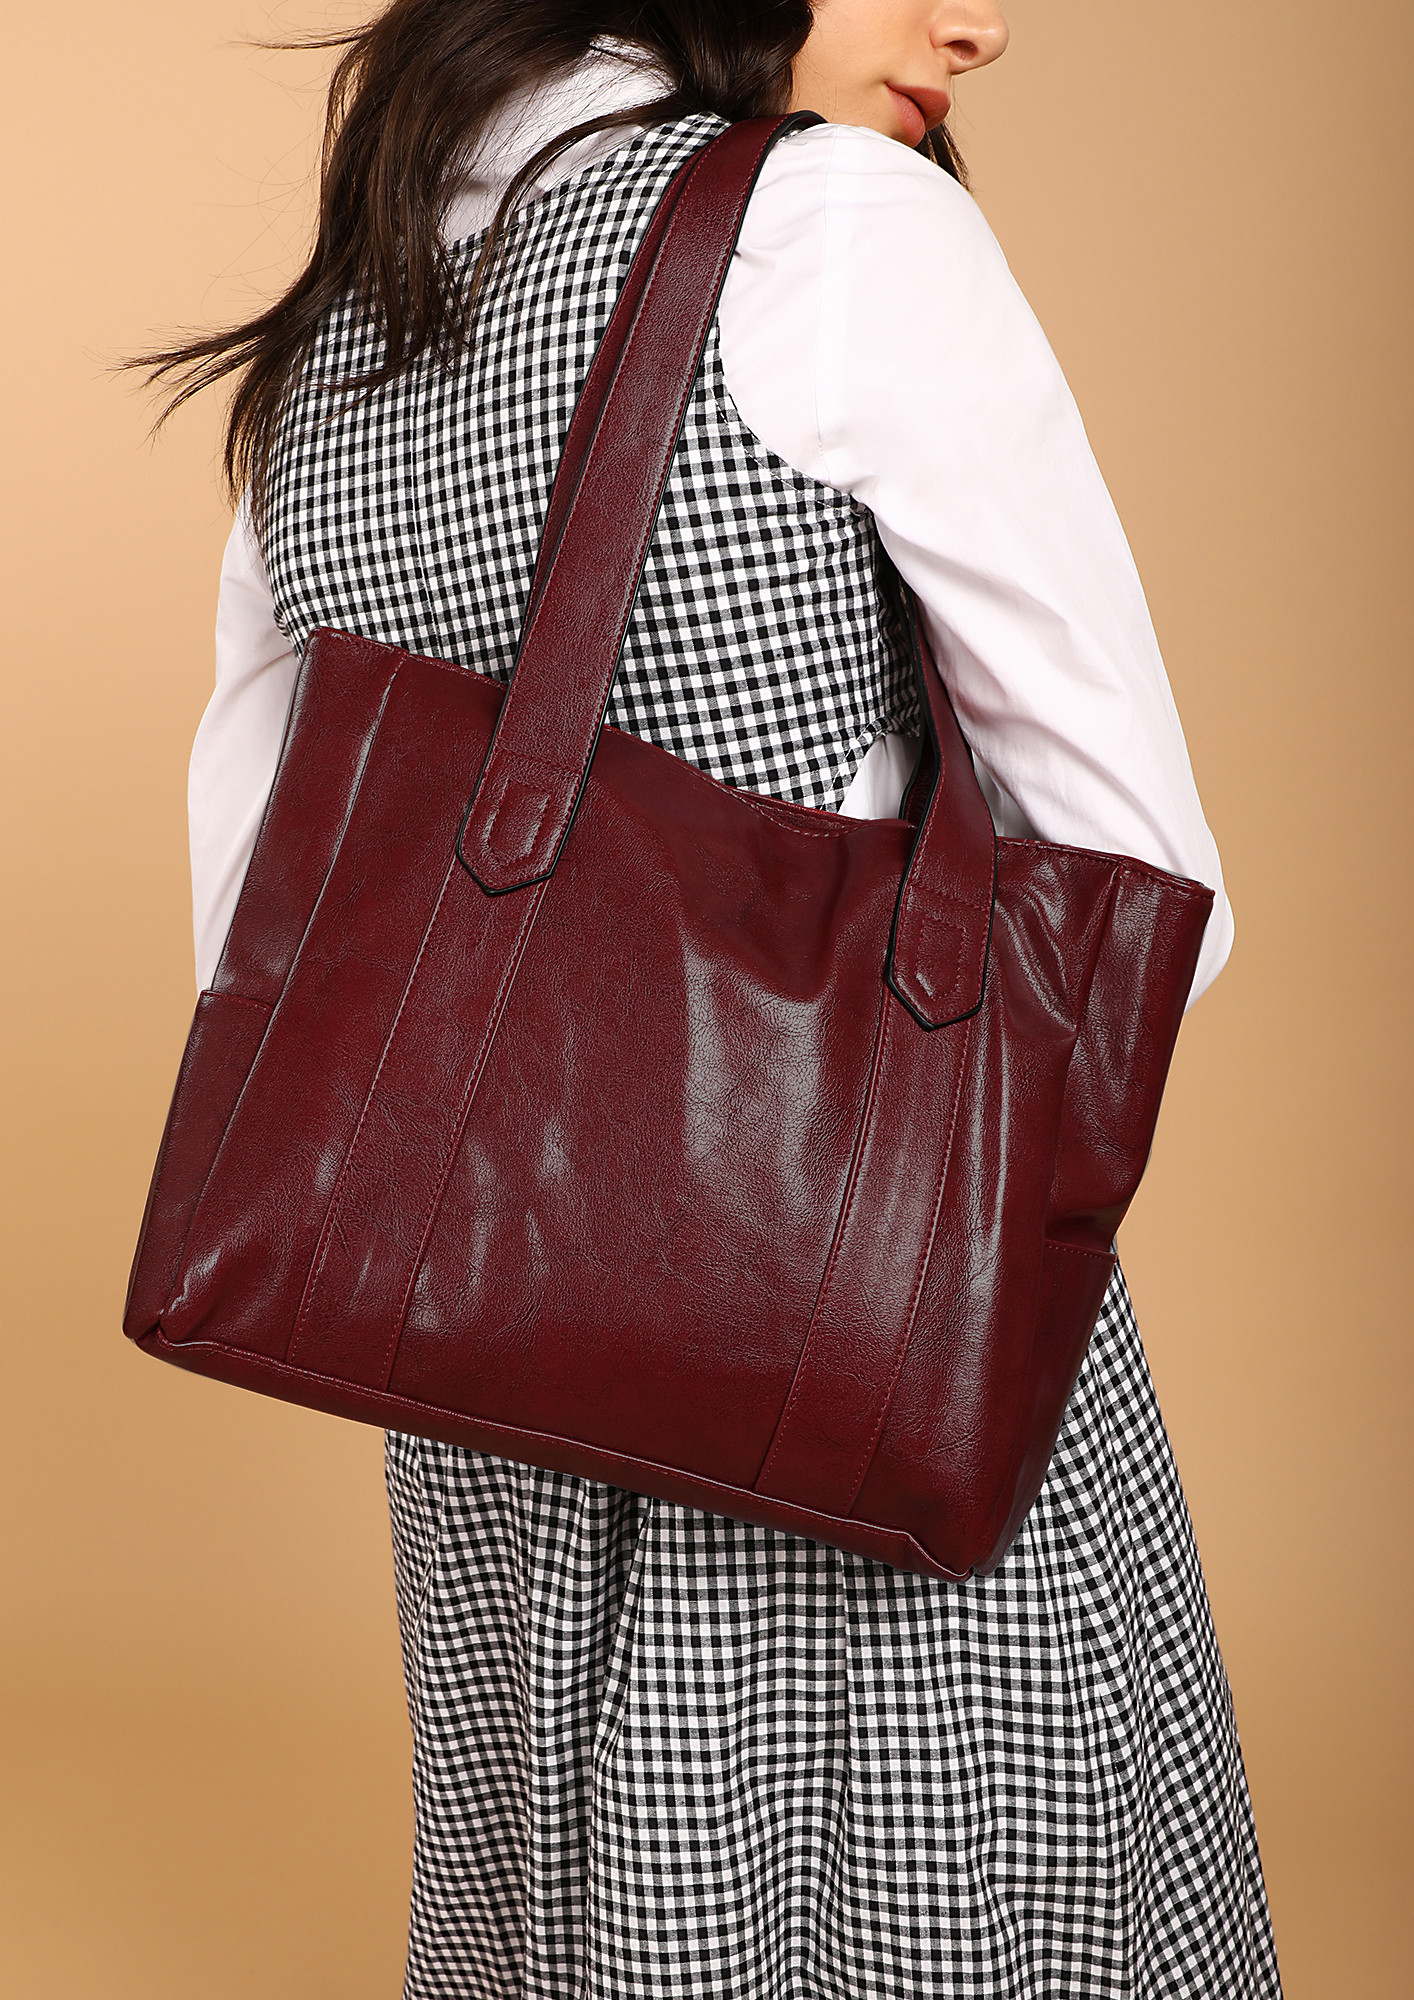 THE RUSH-HOUR SAVIOUR OVERSIZED RED TOTE BAG